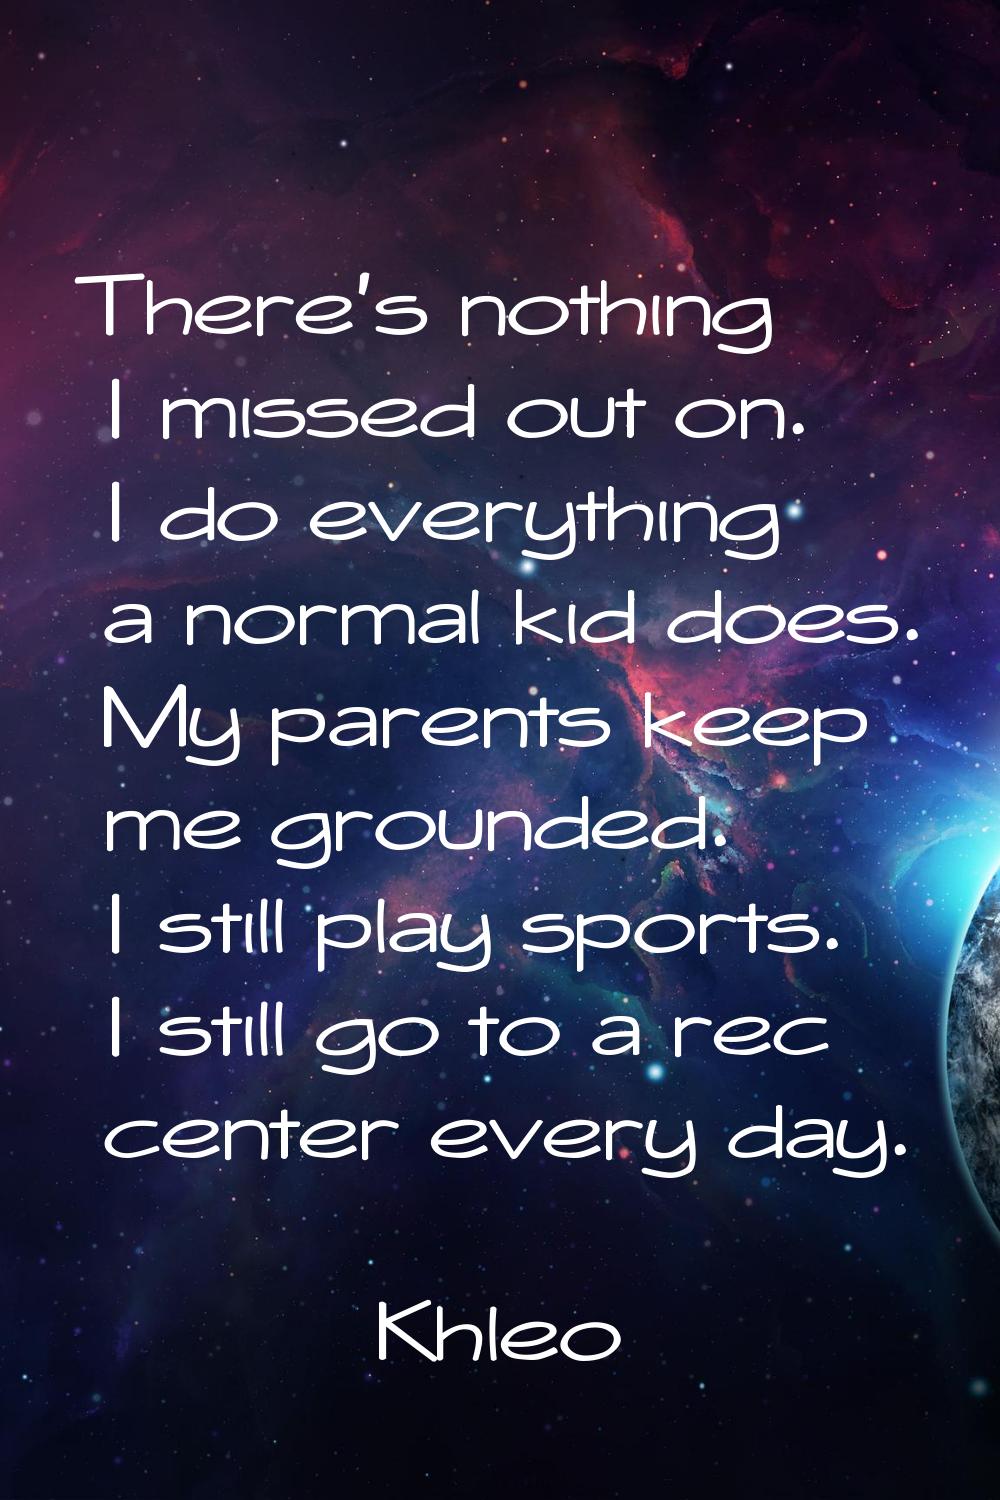 There's nothing I missed out on. I do everything a normal kid does. My parents keep me grounded. I 